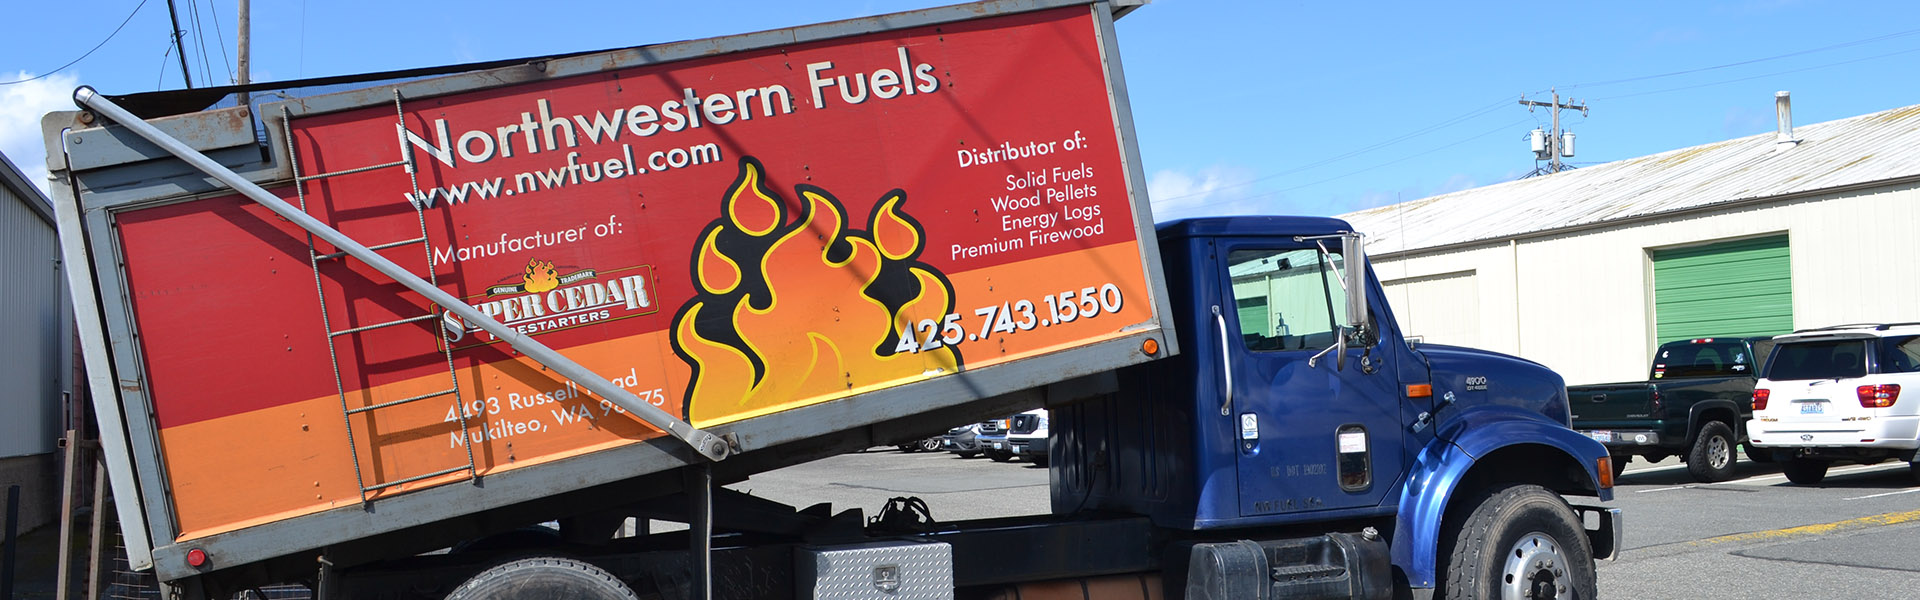 NW Fuel Truck